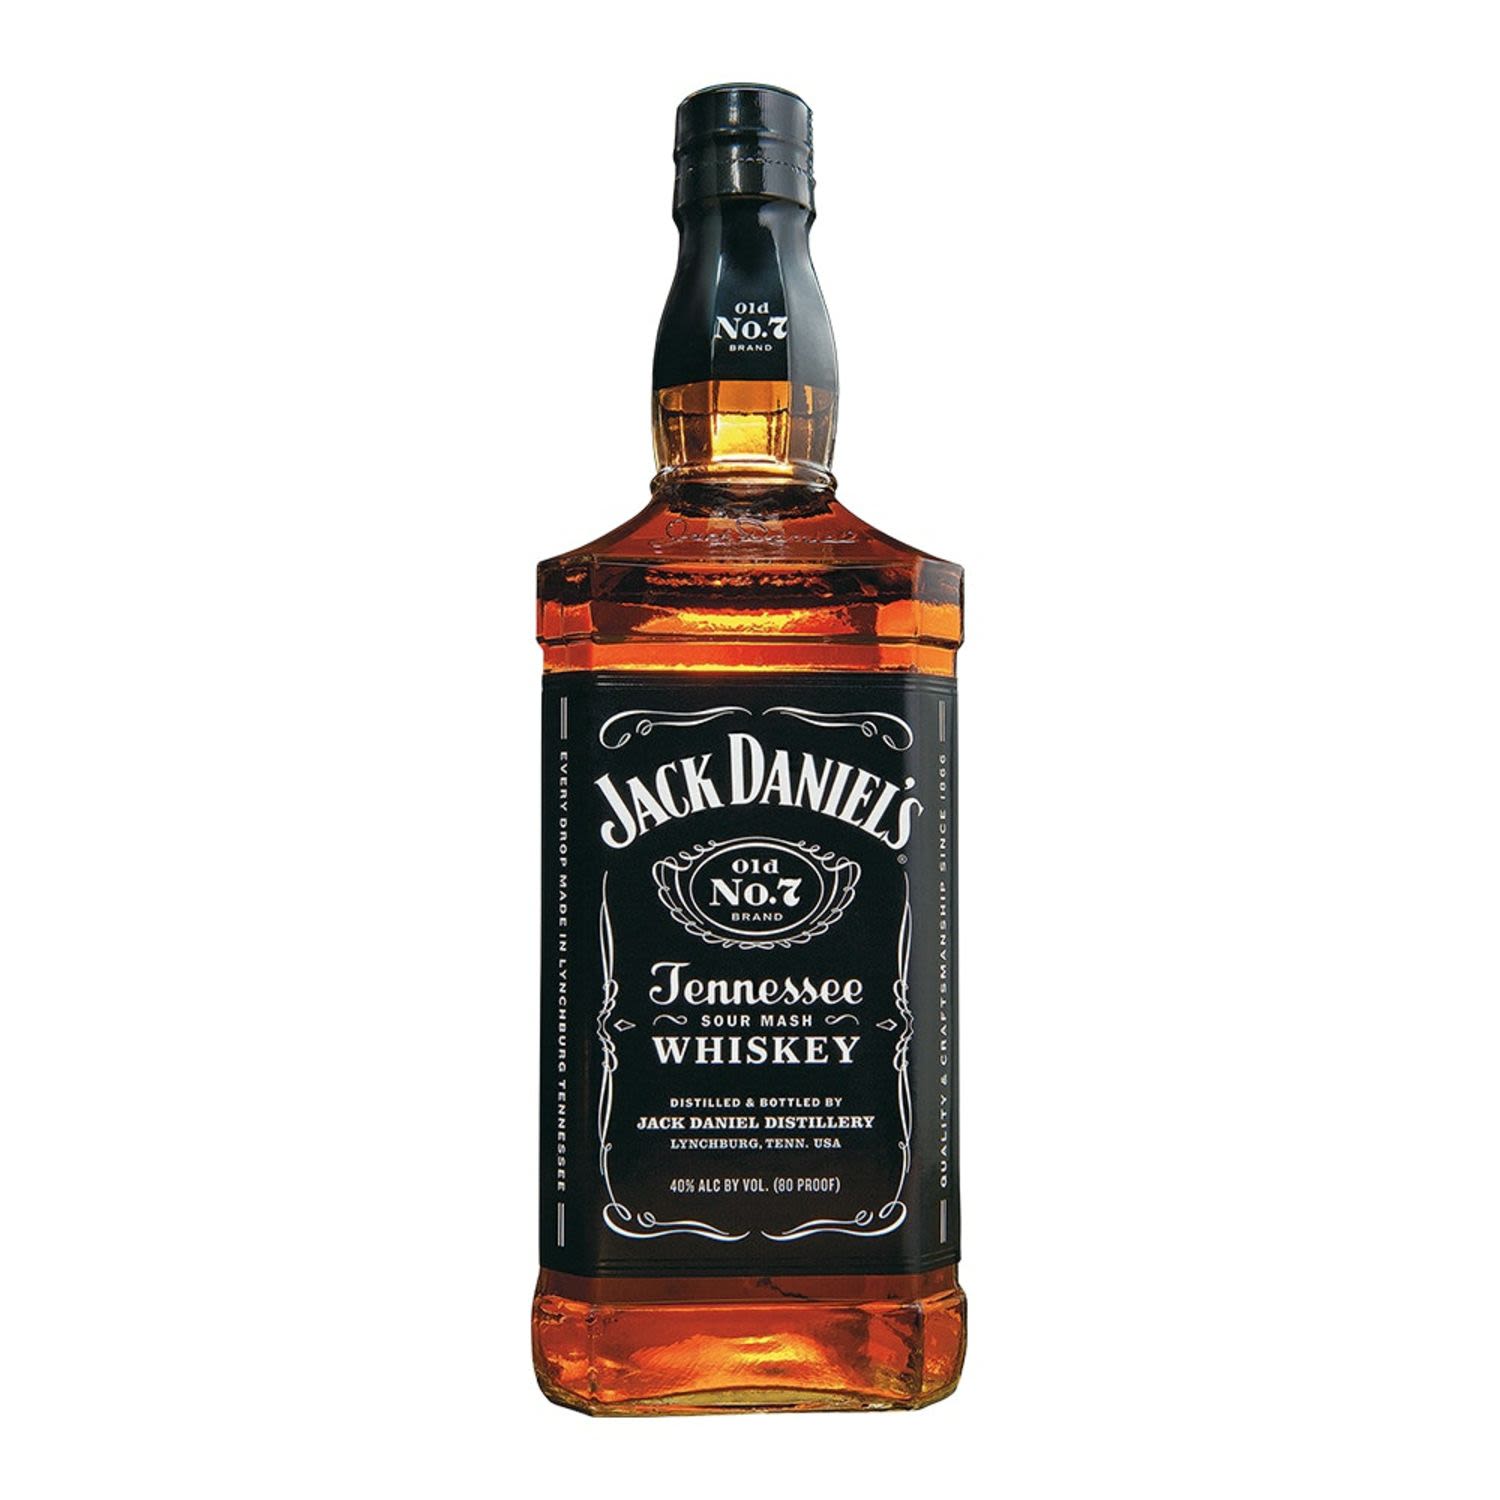 Jack Daniel's Black Label 1L - Jack Daniel's is a brand of Tennessee whiskey and the top-selling American whiskey in the world. It is produced in Lynchburg, Tennessee, by the Jack Daniel Distillery<br /> <br />Alcohol Volume: 40.00%<br /><br />Pack Format: Bottle<br /><br />Standard Drinks: 31.6<br /><br />Pack Type: Bottle<br /><br />Country of Origin: USA<br />